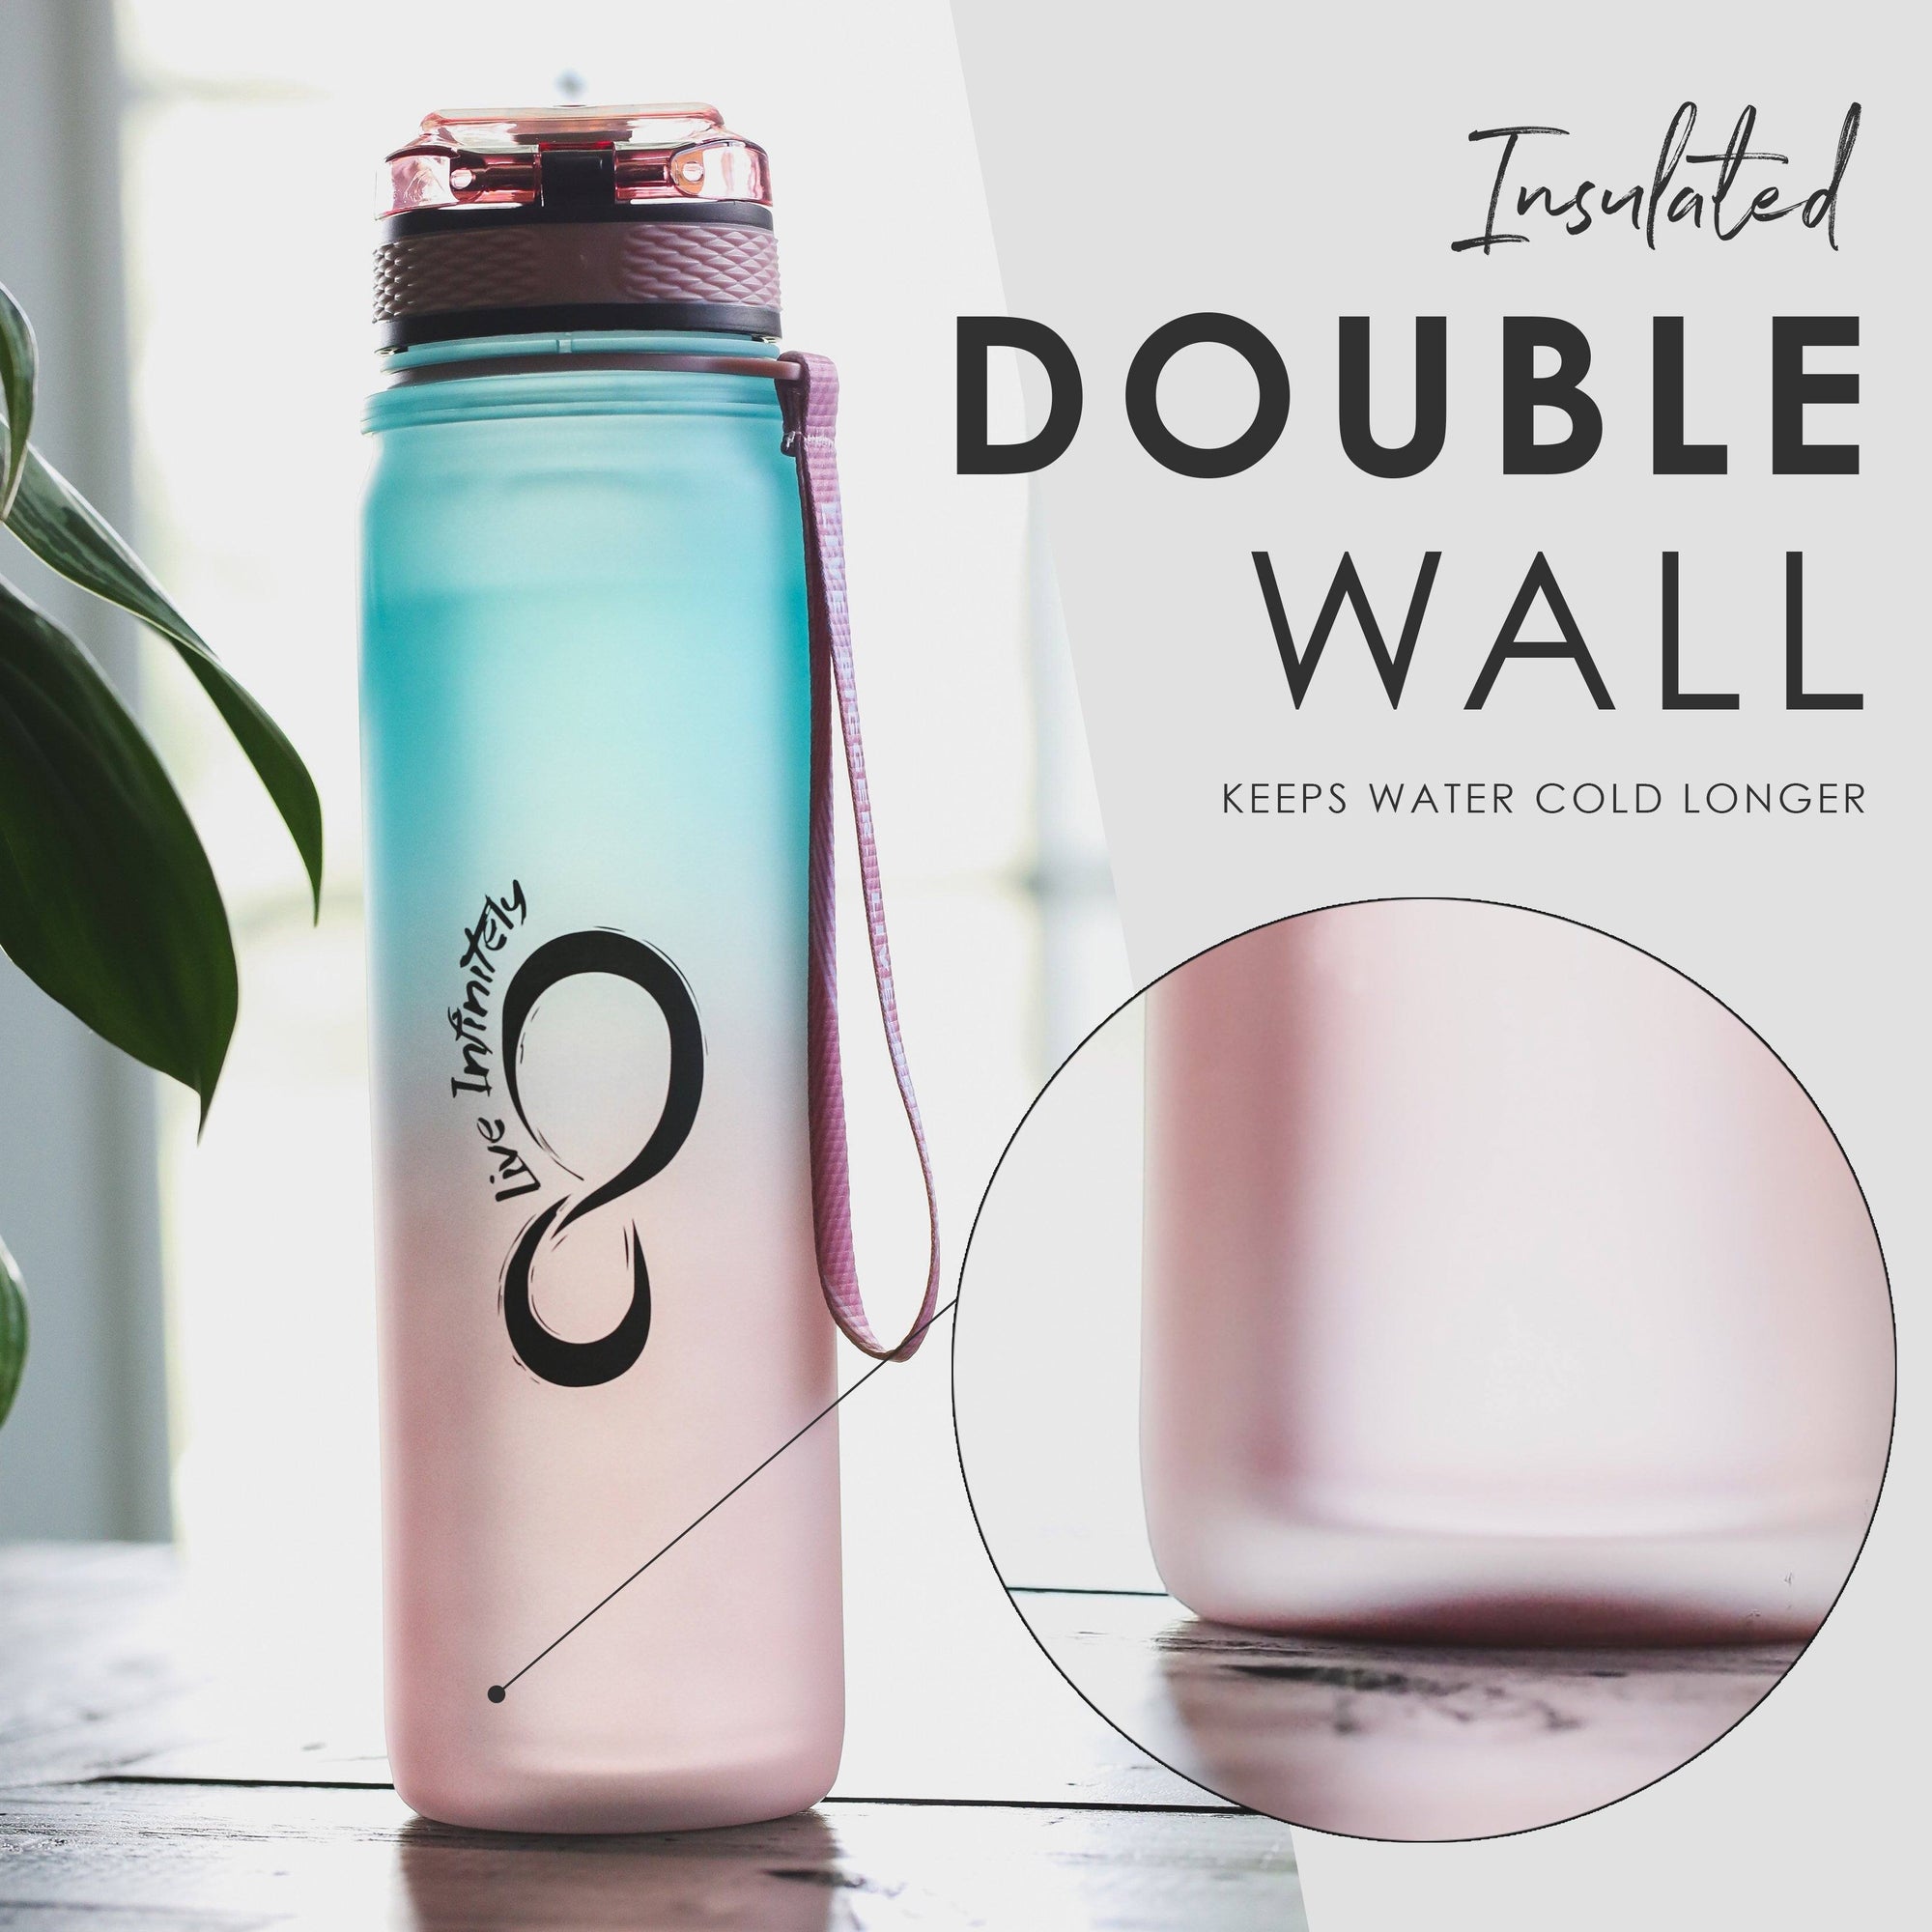 Initial Ombre Water Bottle - M